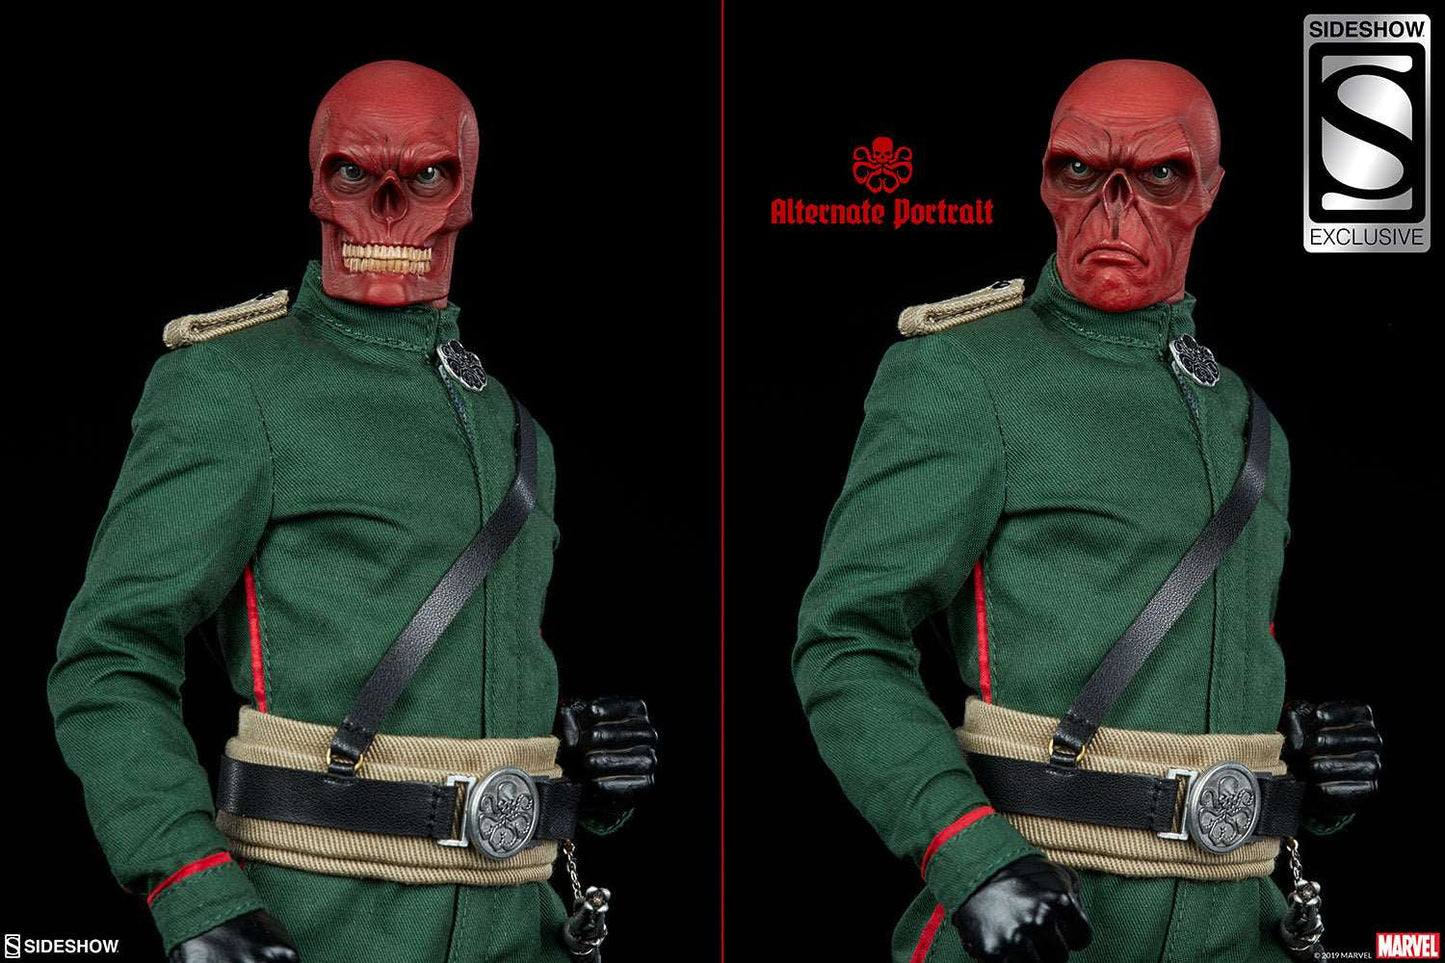 Sideshow exclusive Marvel Red Skull Sixth Scale Figure with grinning skull headsculpt and resting bitch face headsculpt